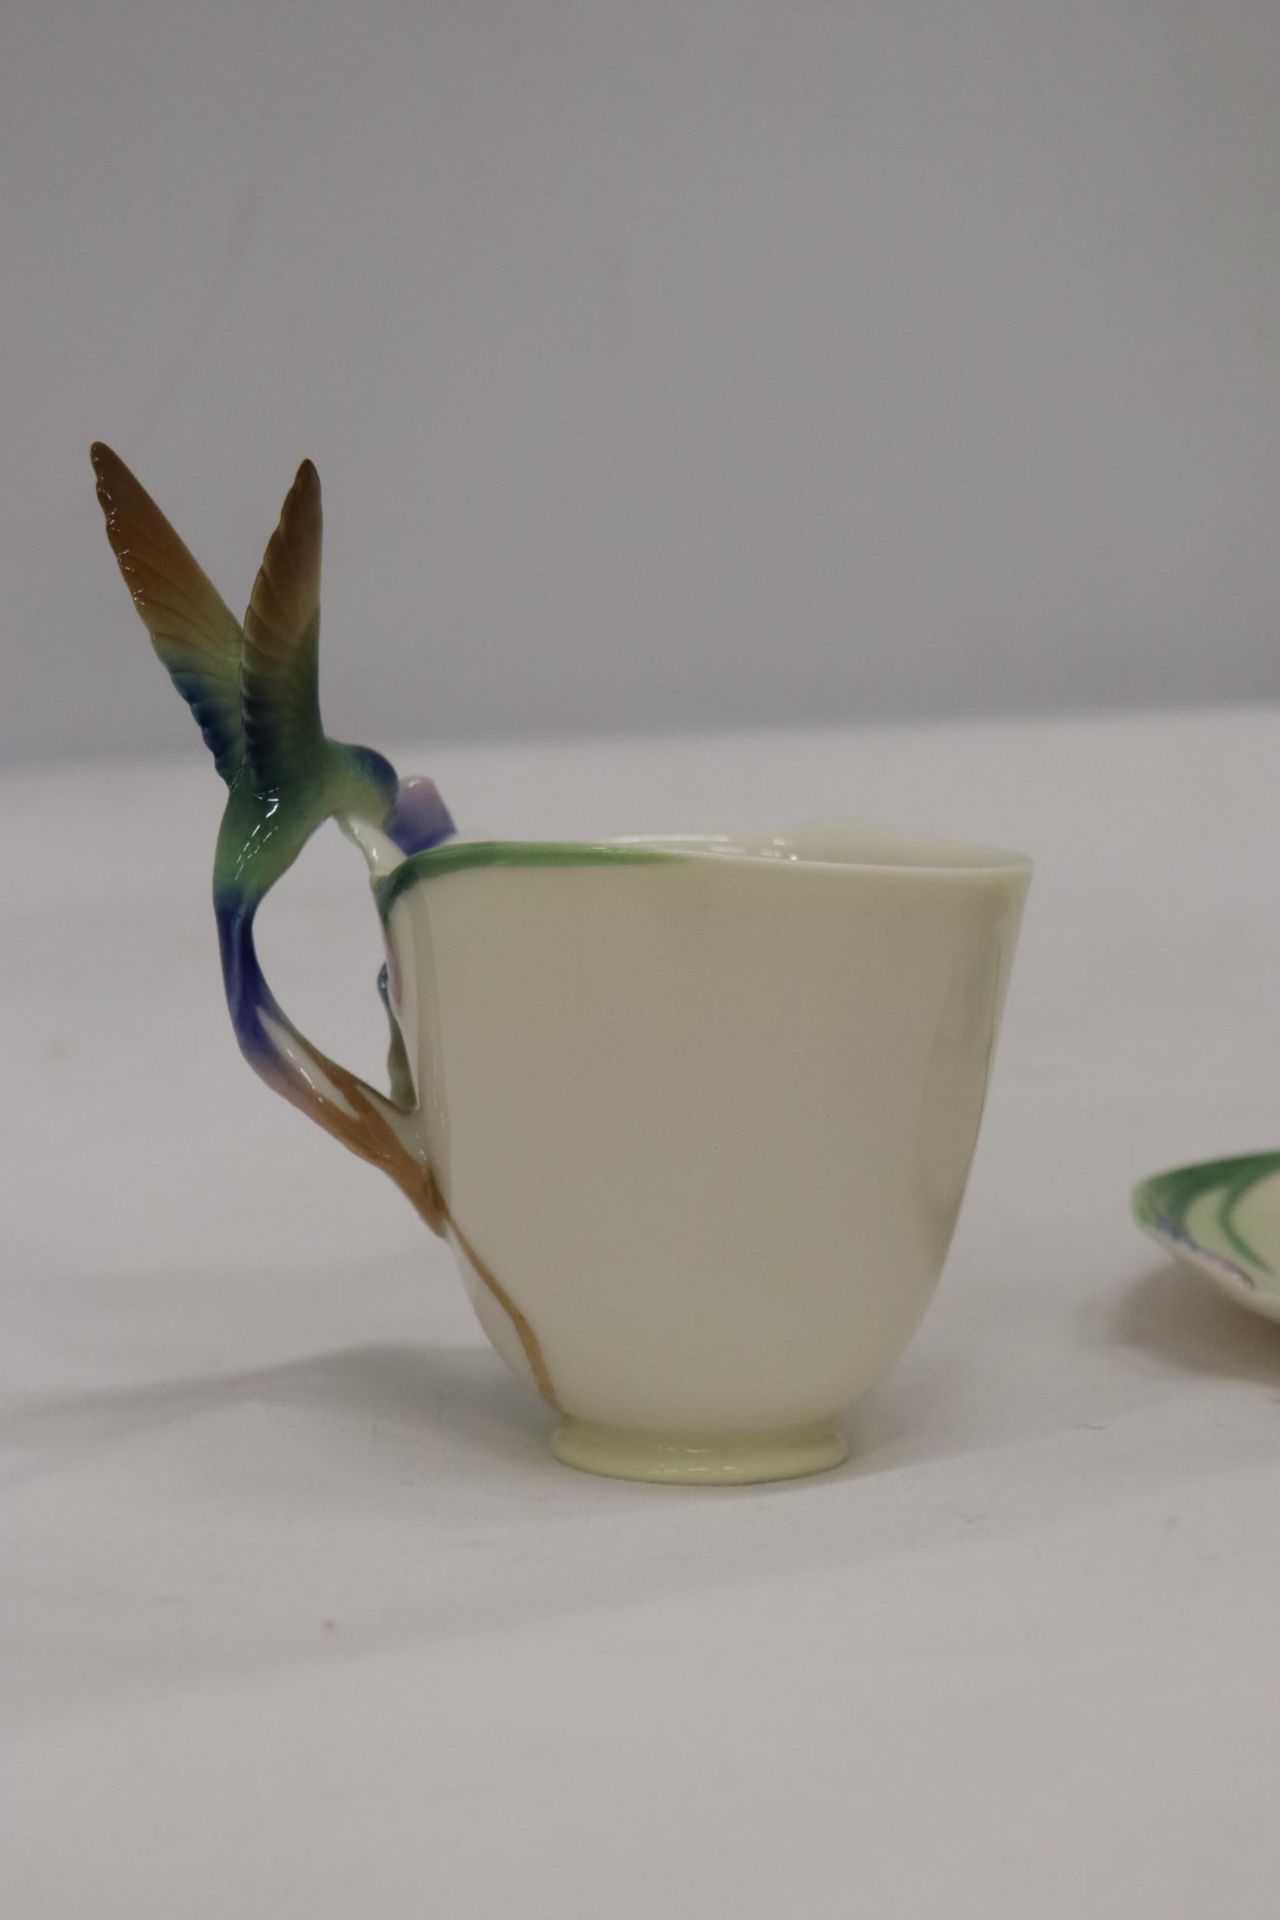 A FRANZ PORCELAIN CUP, SAUCER AND SPOON SET WITH HUMMING BIRD DESIGN. AF - CHIP TO SAUCER - Image 5 of 8